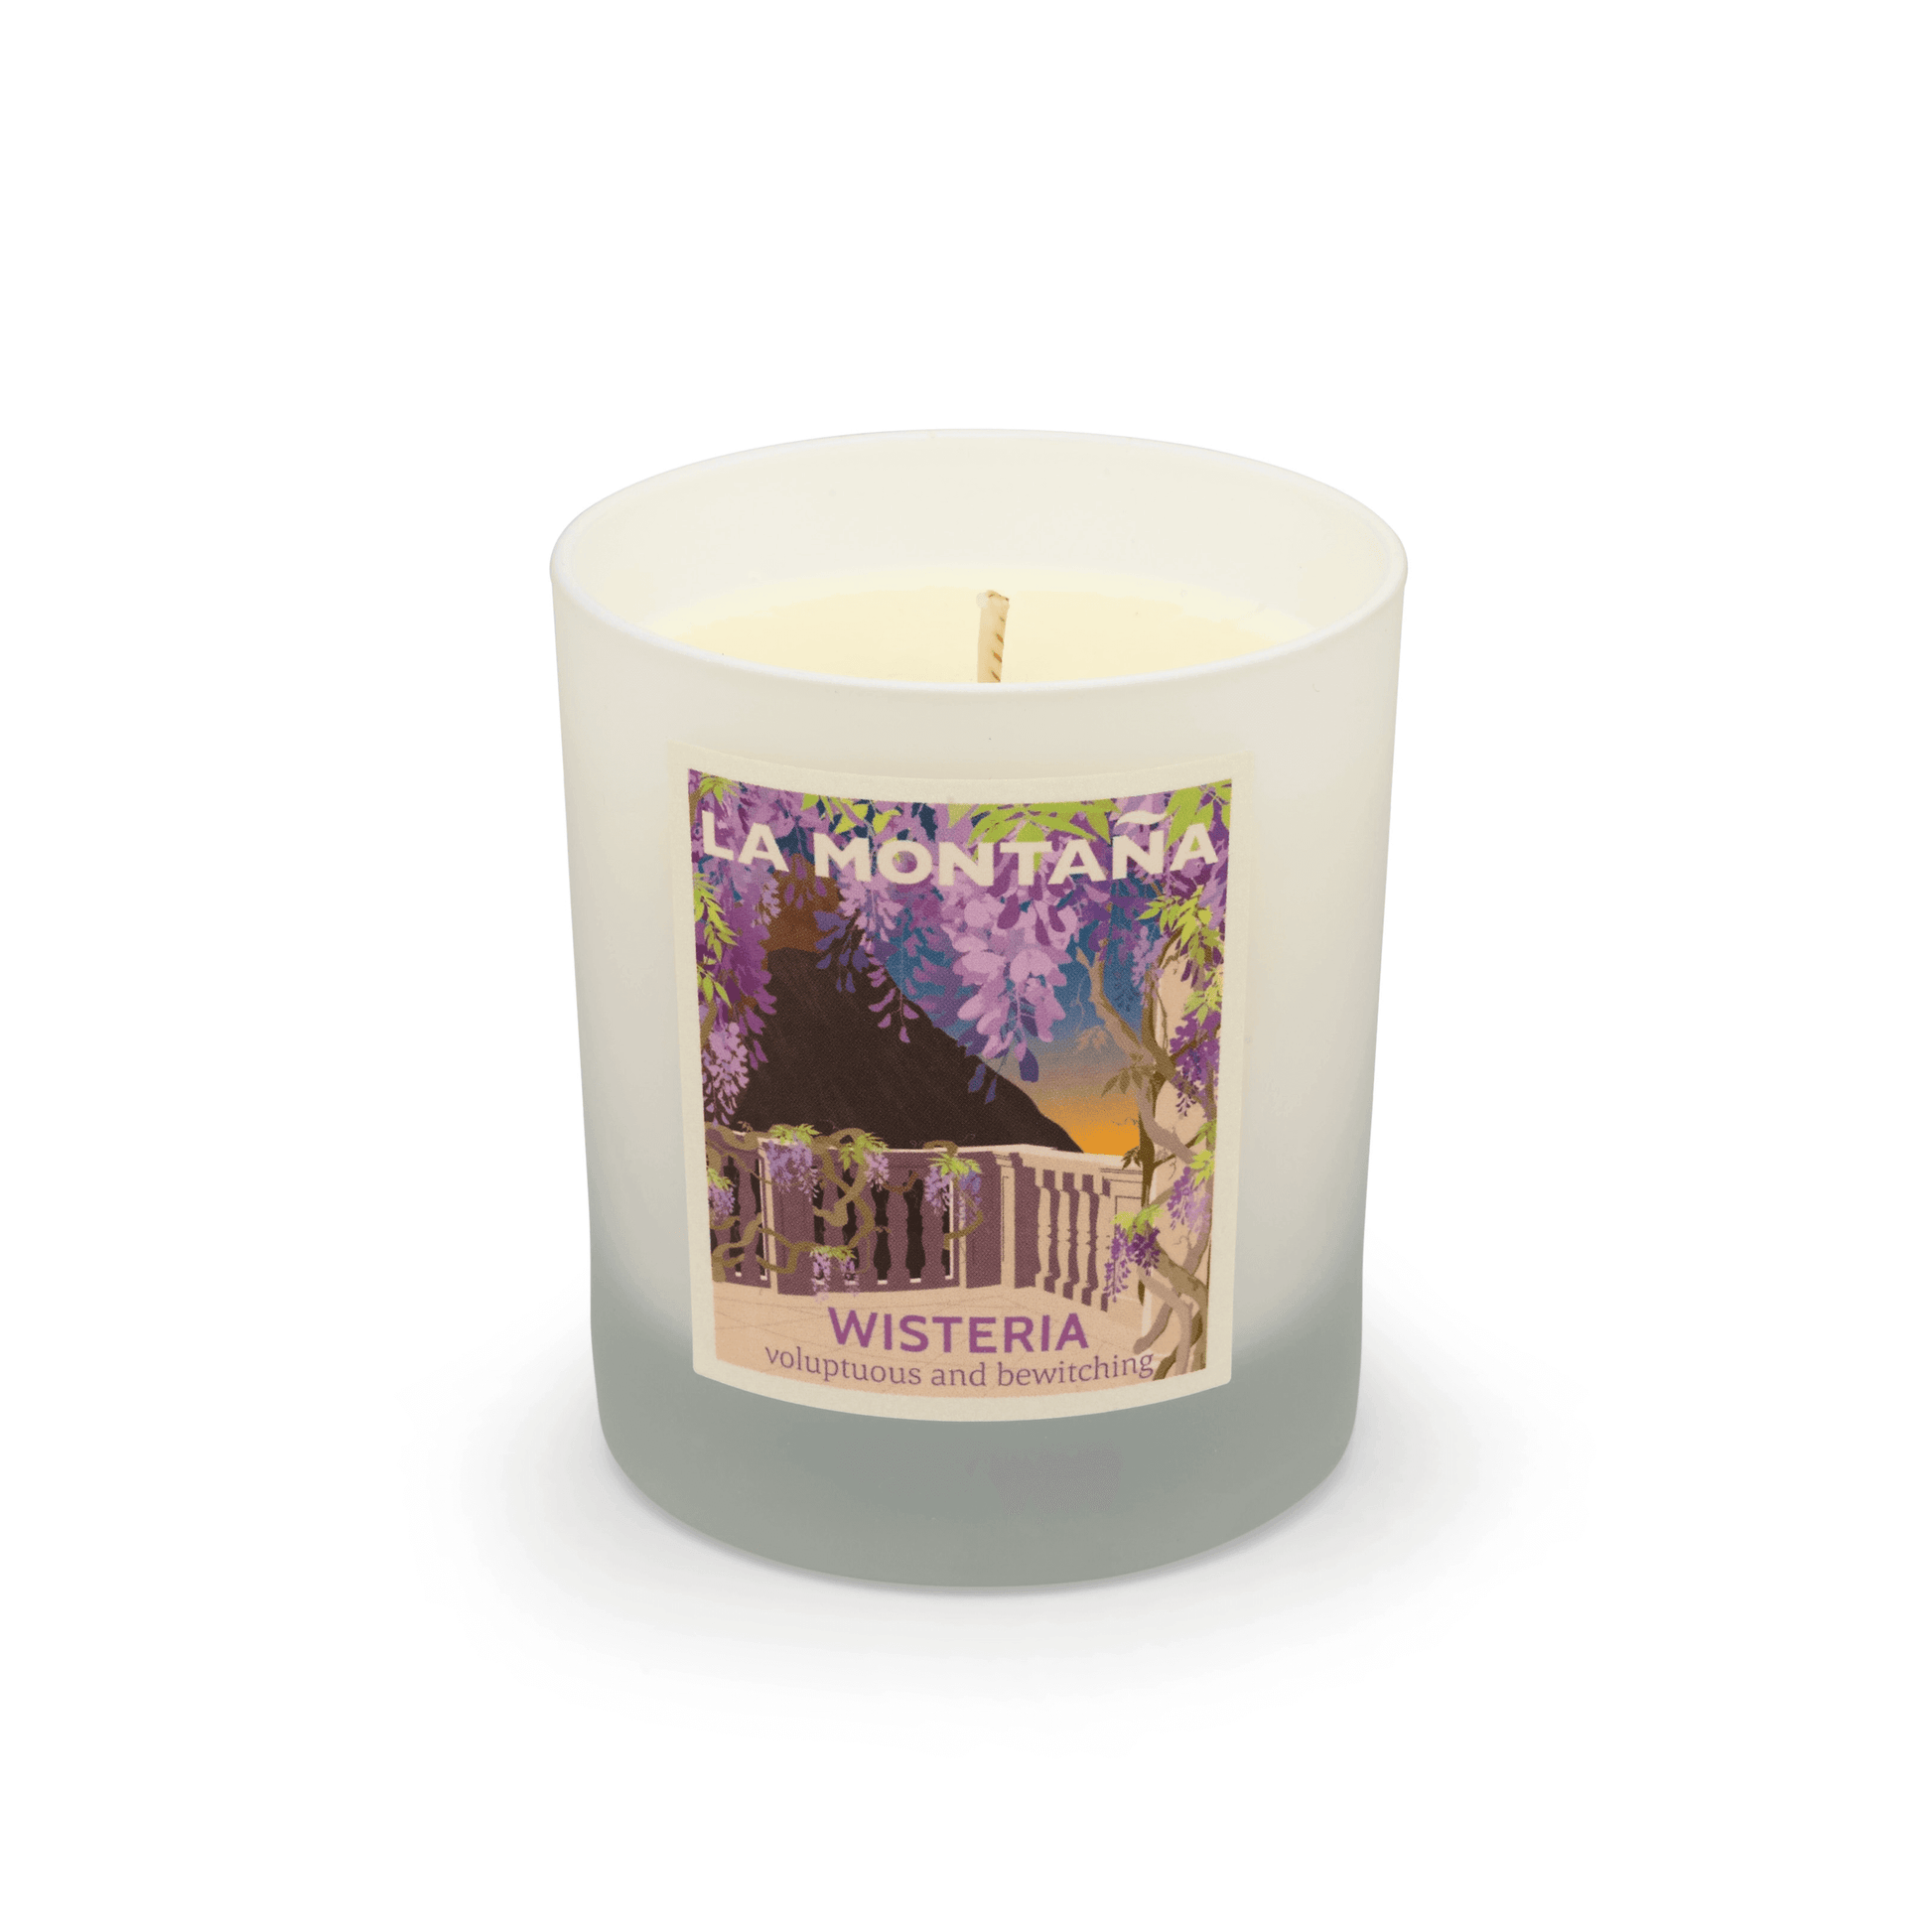 La Montaña Wisteria Scented Candle - Osmology Scented Candles & Home Fragrance